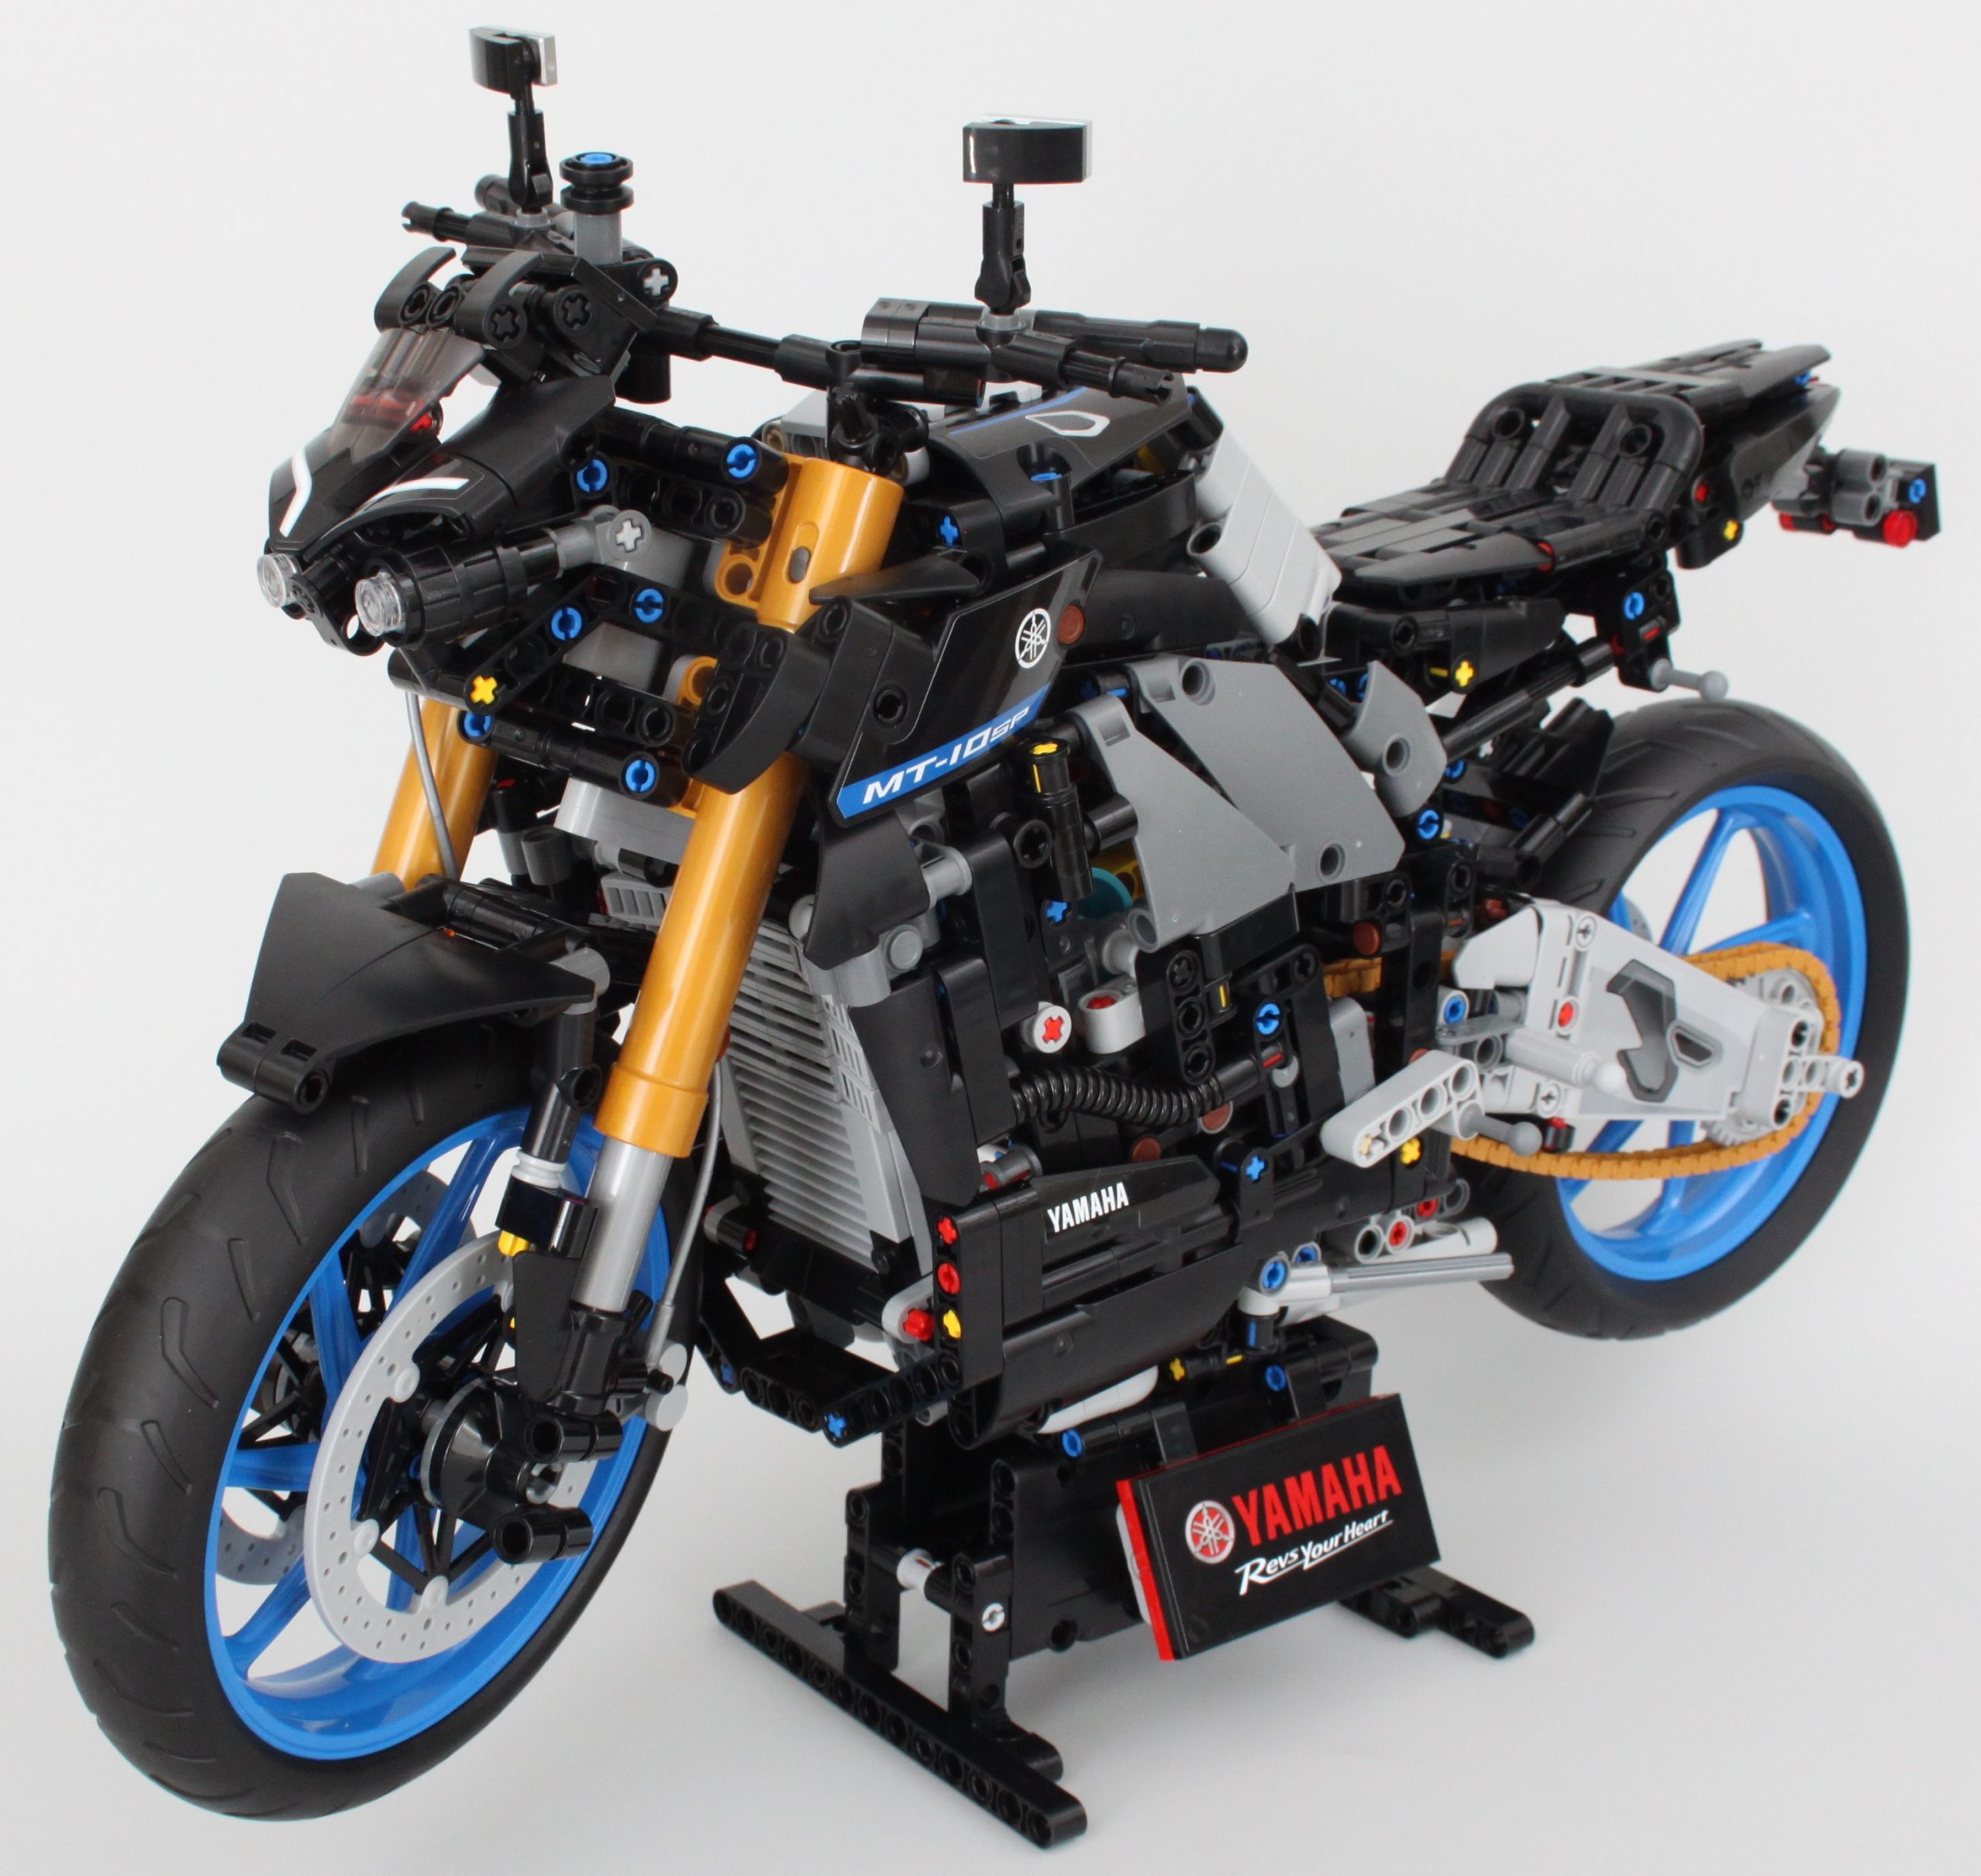 LEGO officially reveals the Technic 42159 Yamaha MT-10 SP